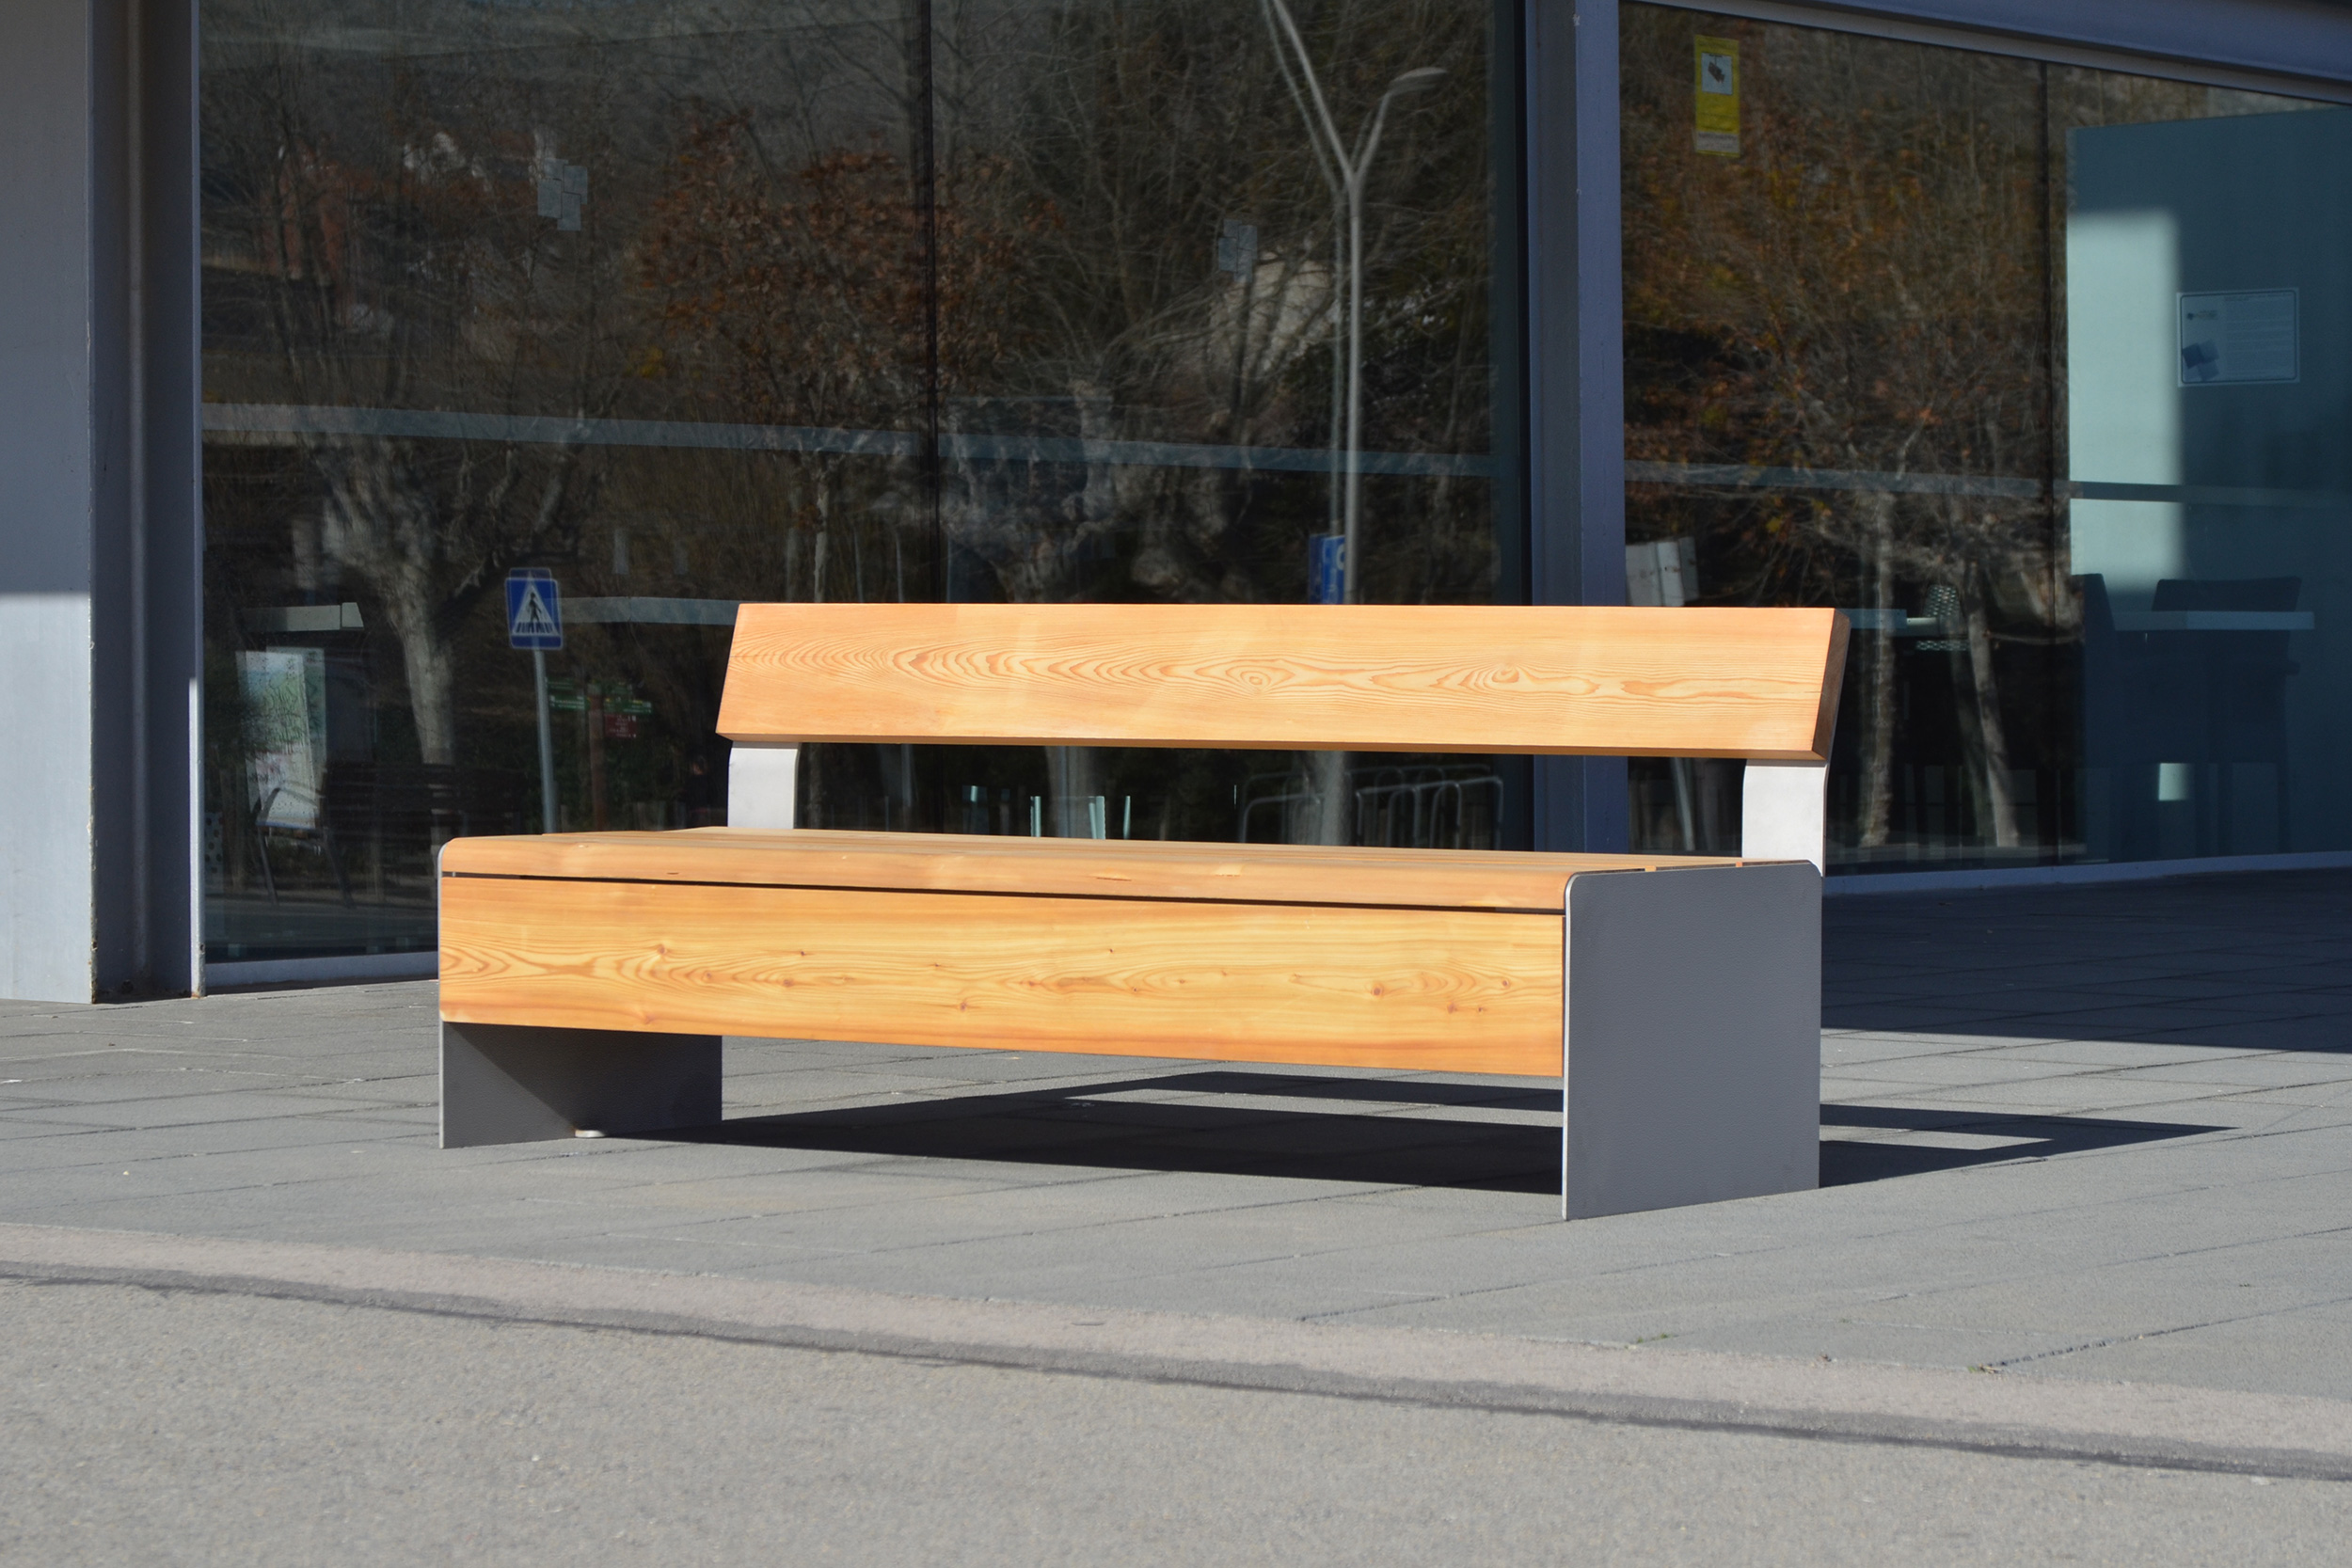 Outdoor bench, with backrest. Made of nordic pine wood and stainless steel